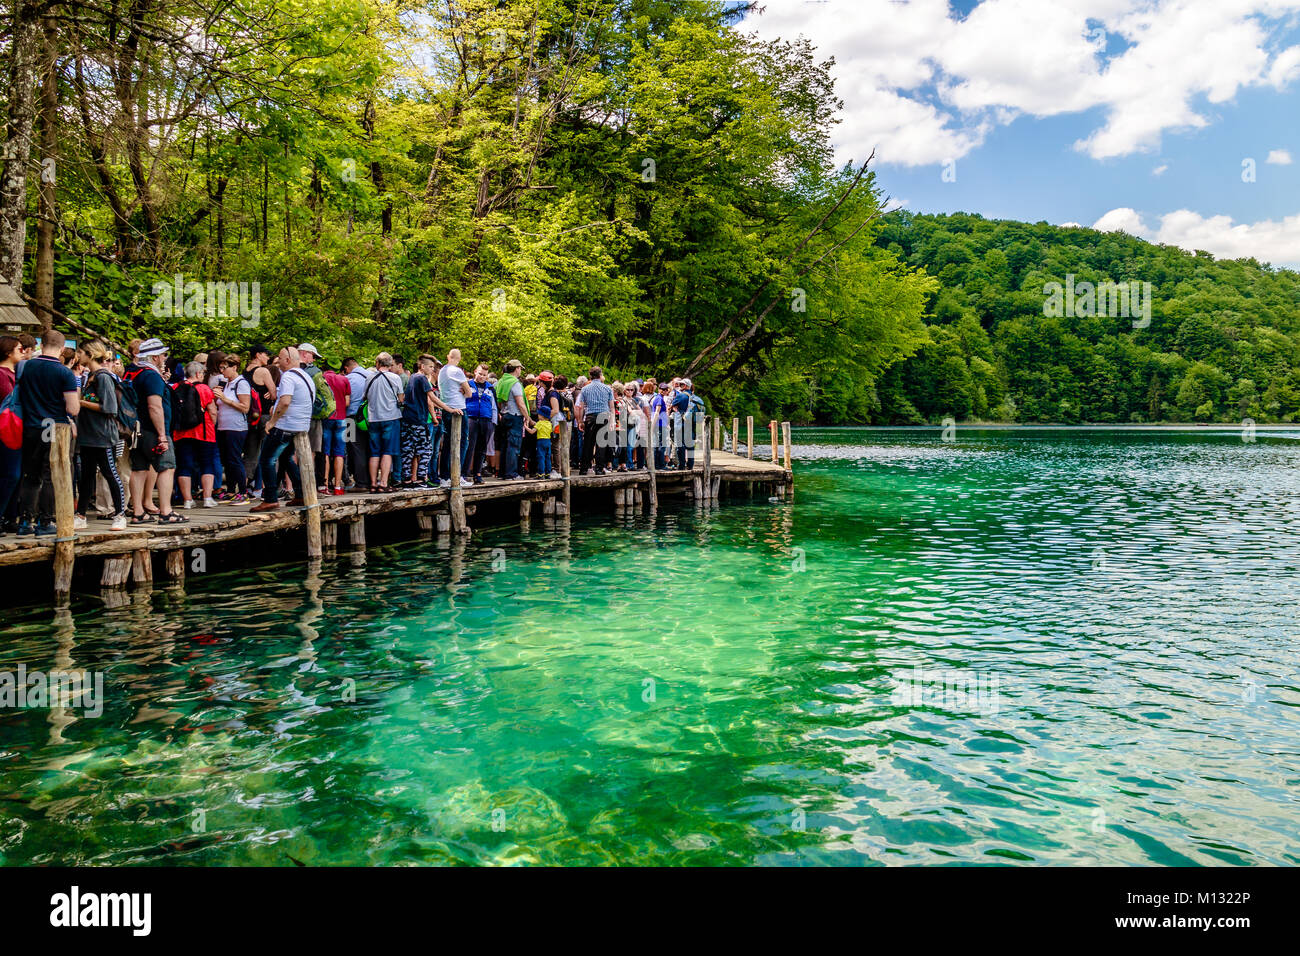 Tourists waiting to board the ferry on the boardwalk at Plitvice Lakes National Park, Croatia Stock Photo